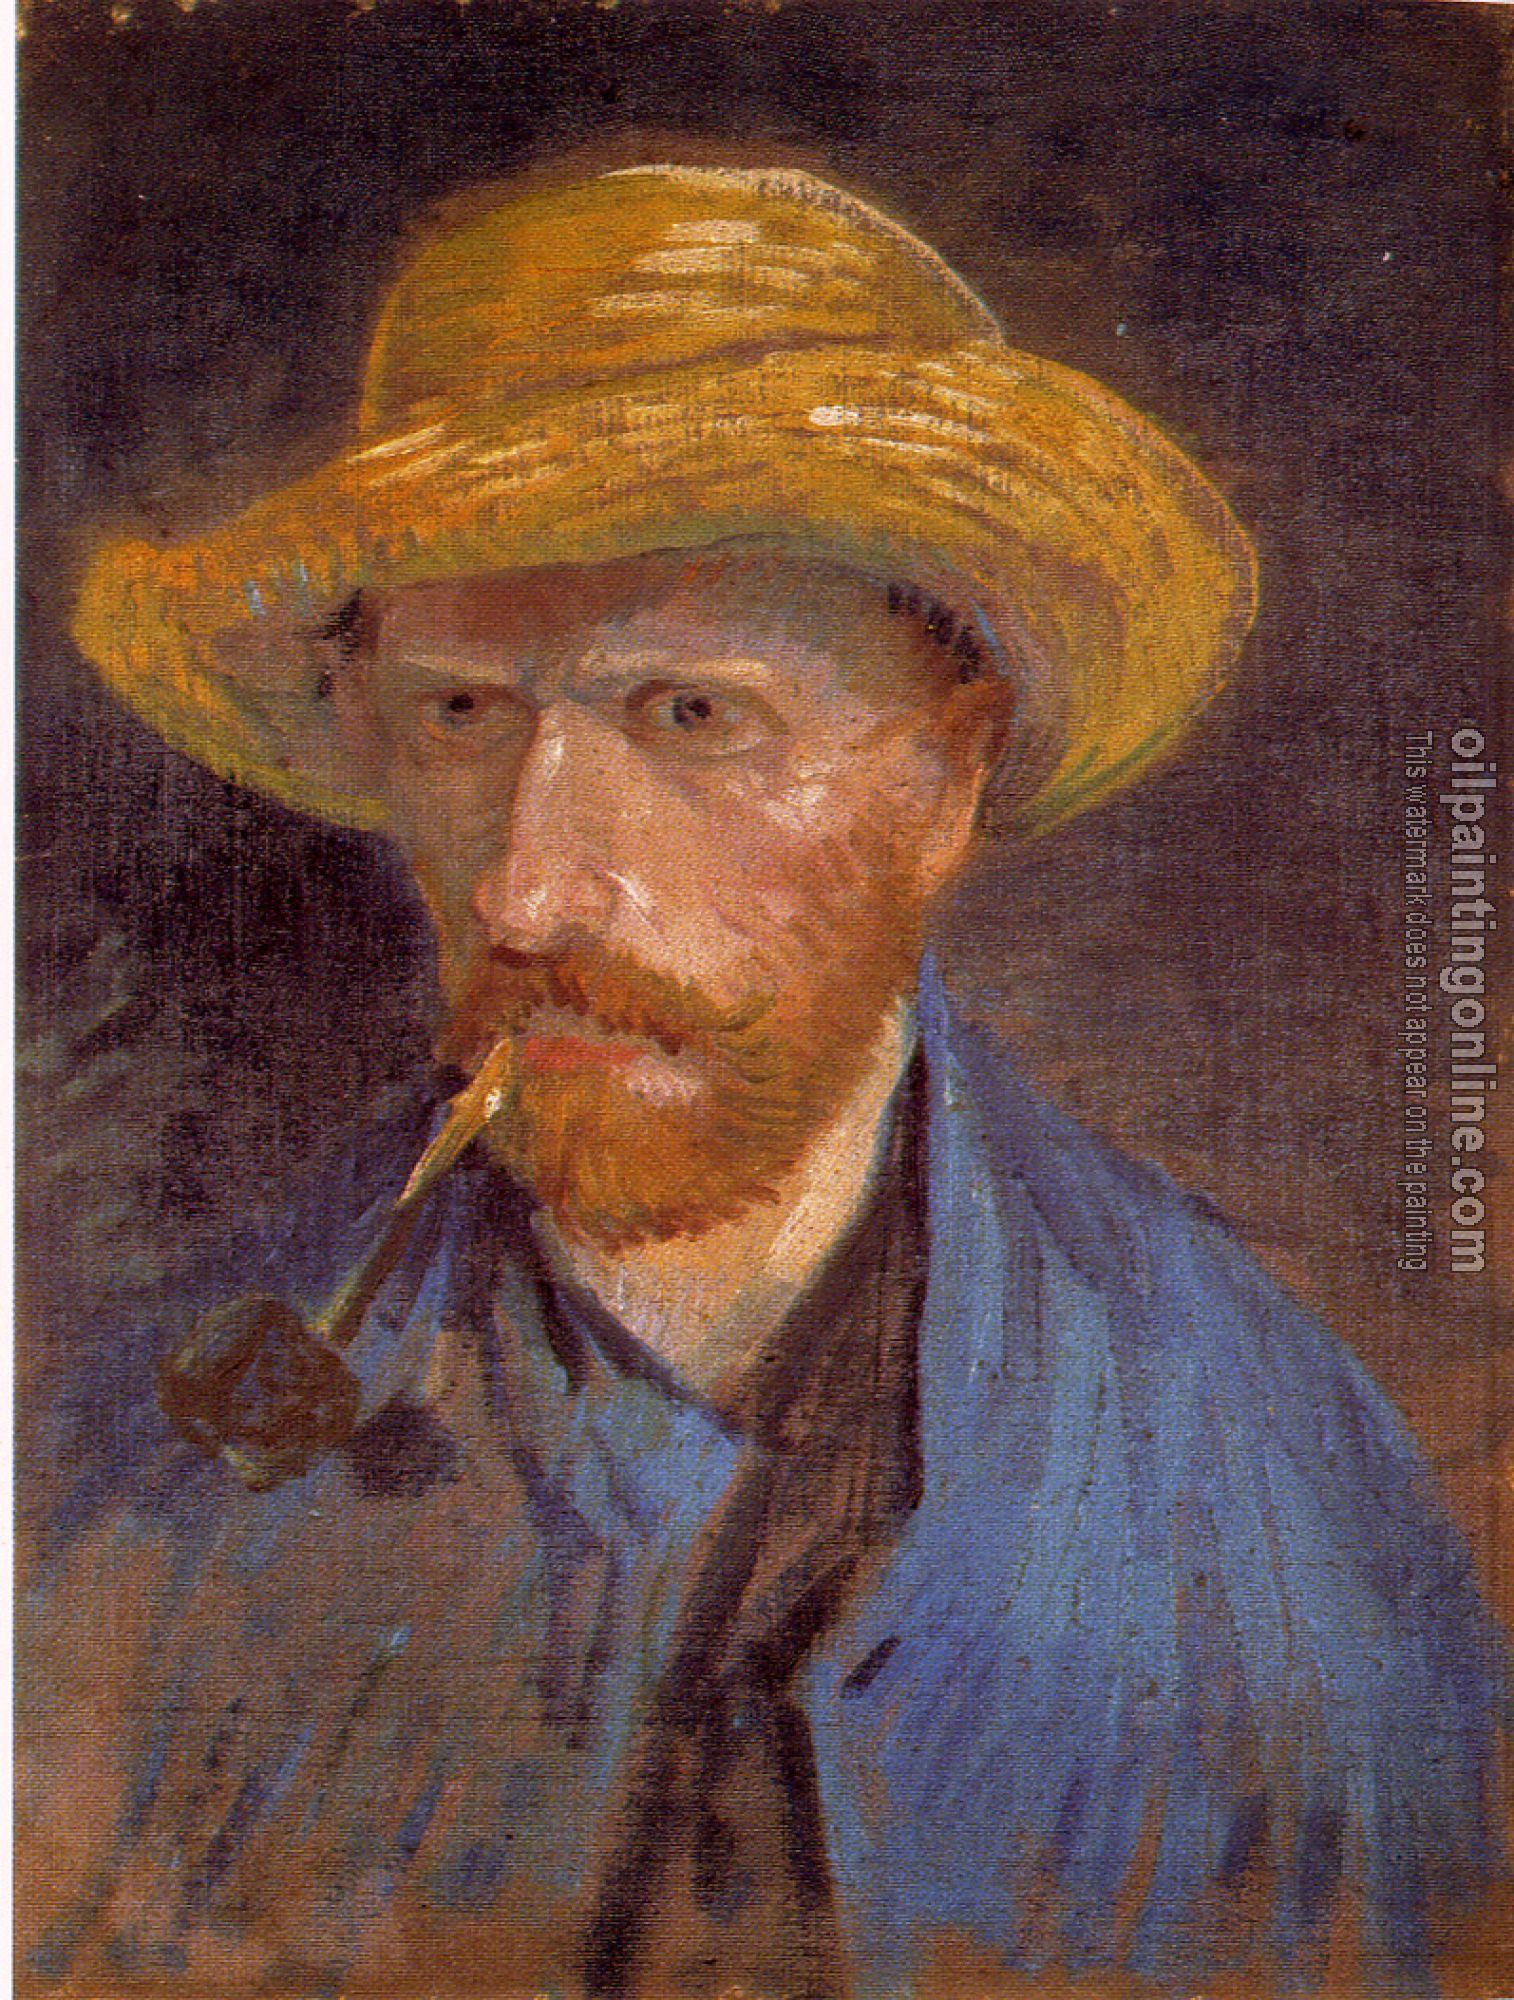 Gogh, Vincent van - Self-Portrait with Straw Hat and Pipe